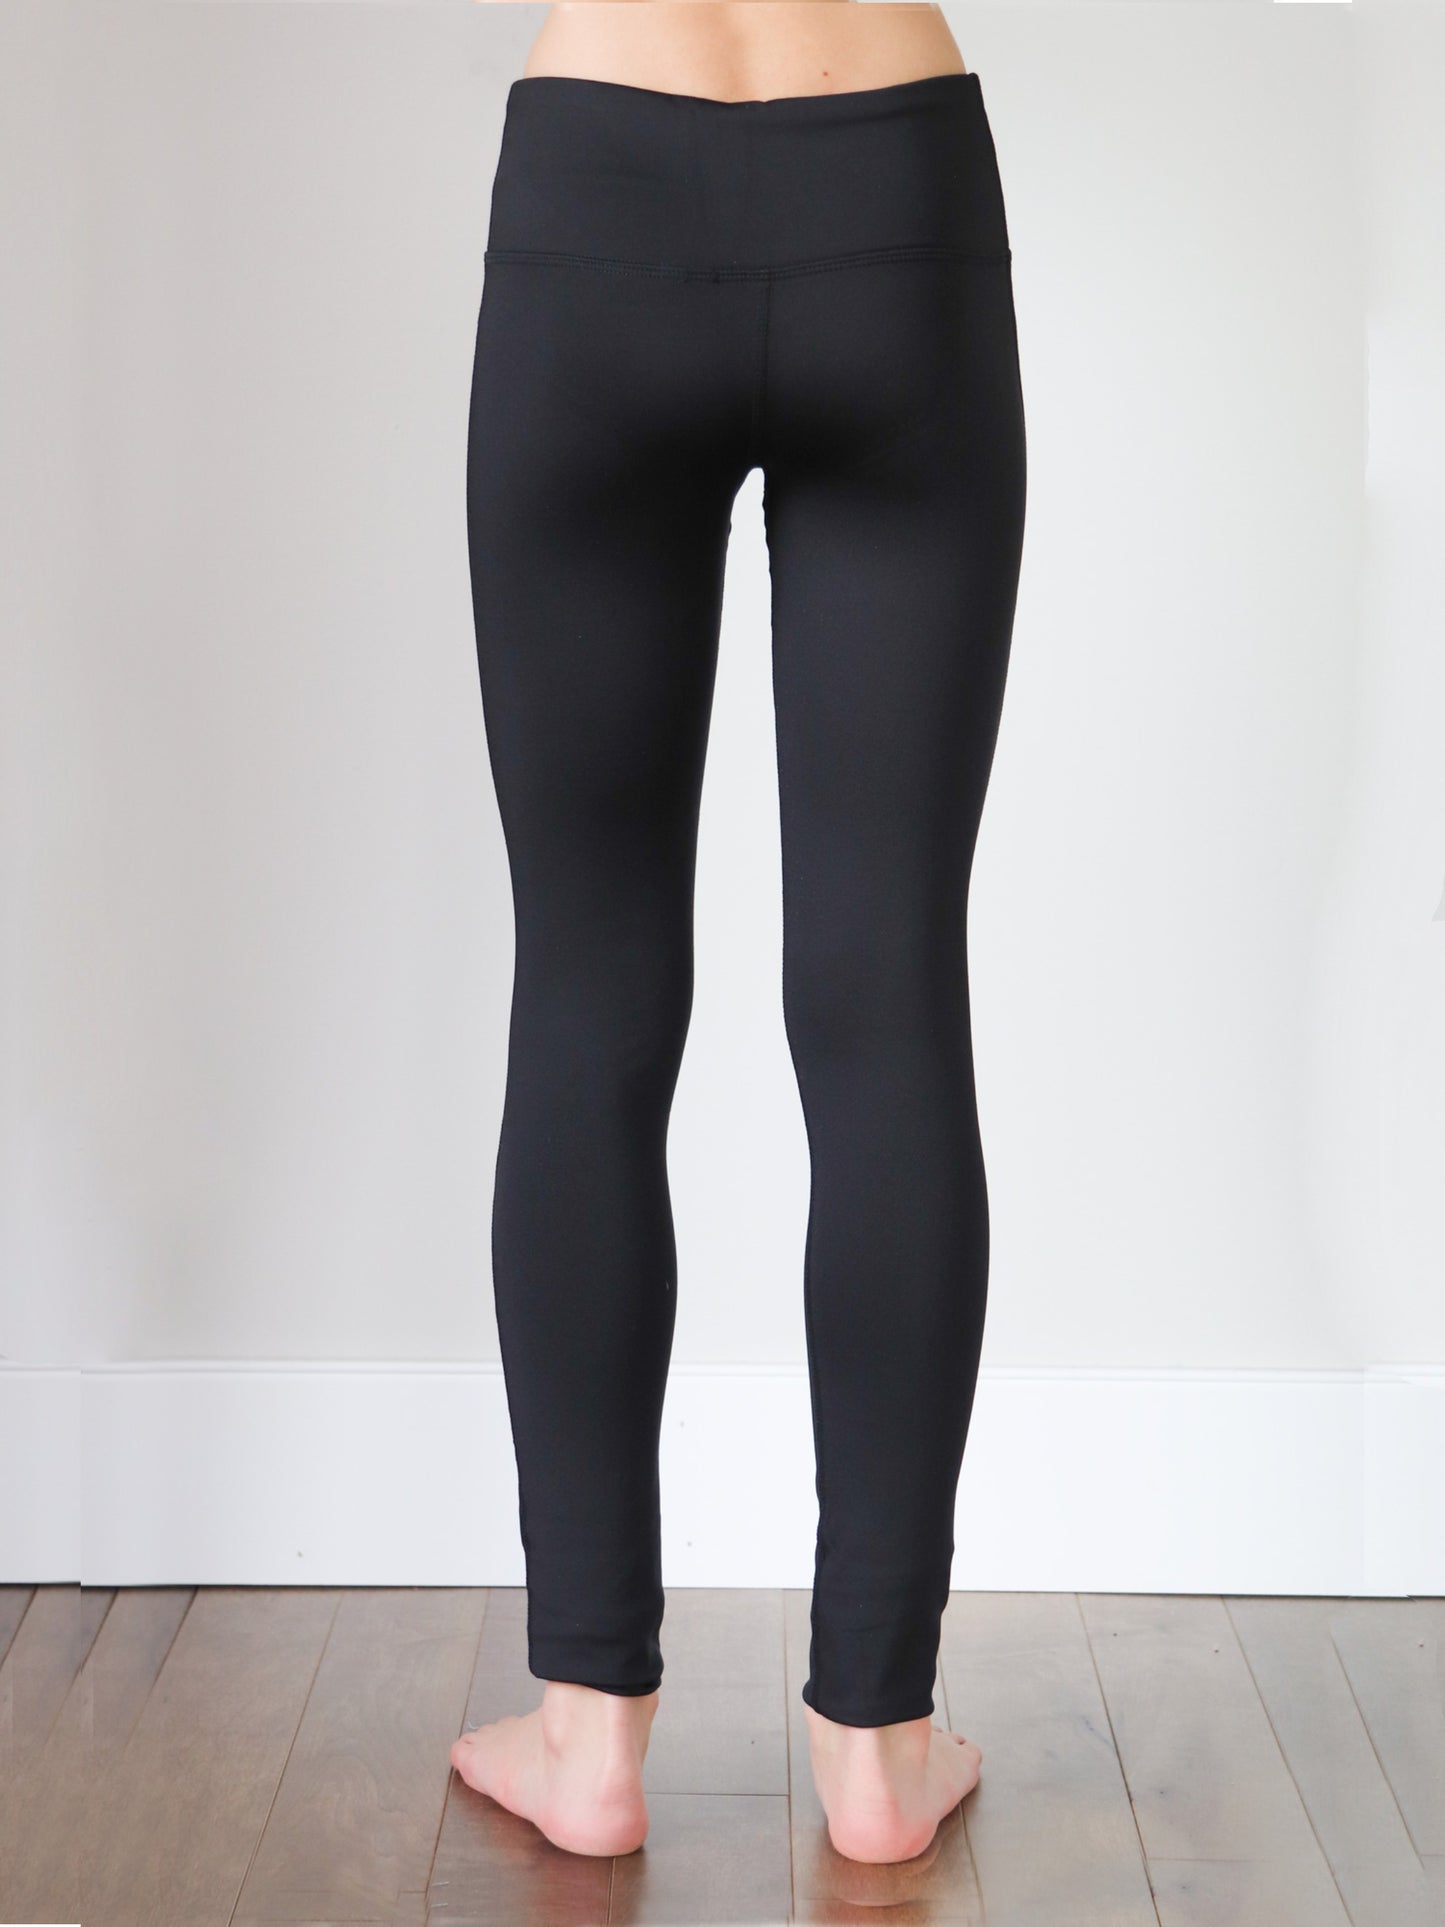 Load the Bases - Women's One Size Leggings – Apple Girl Boutique